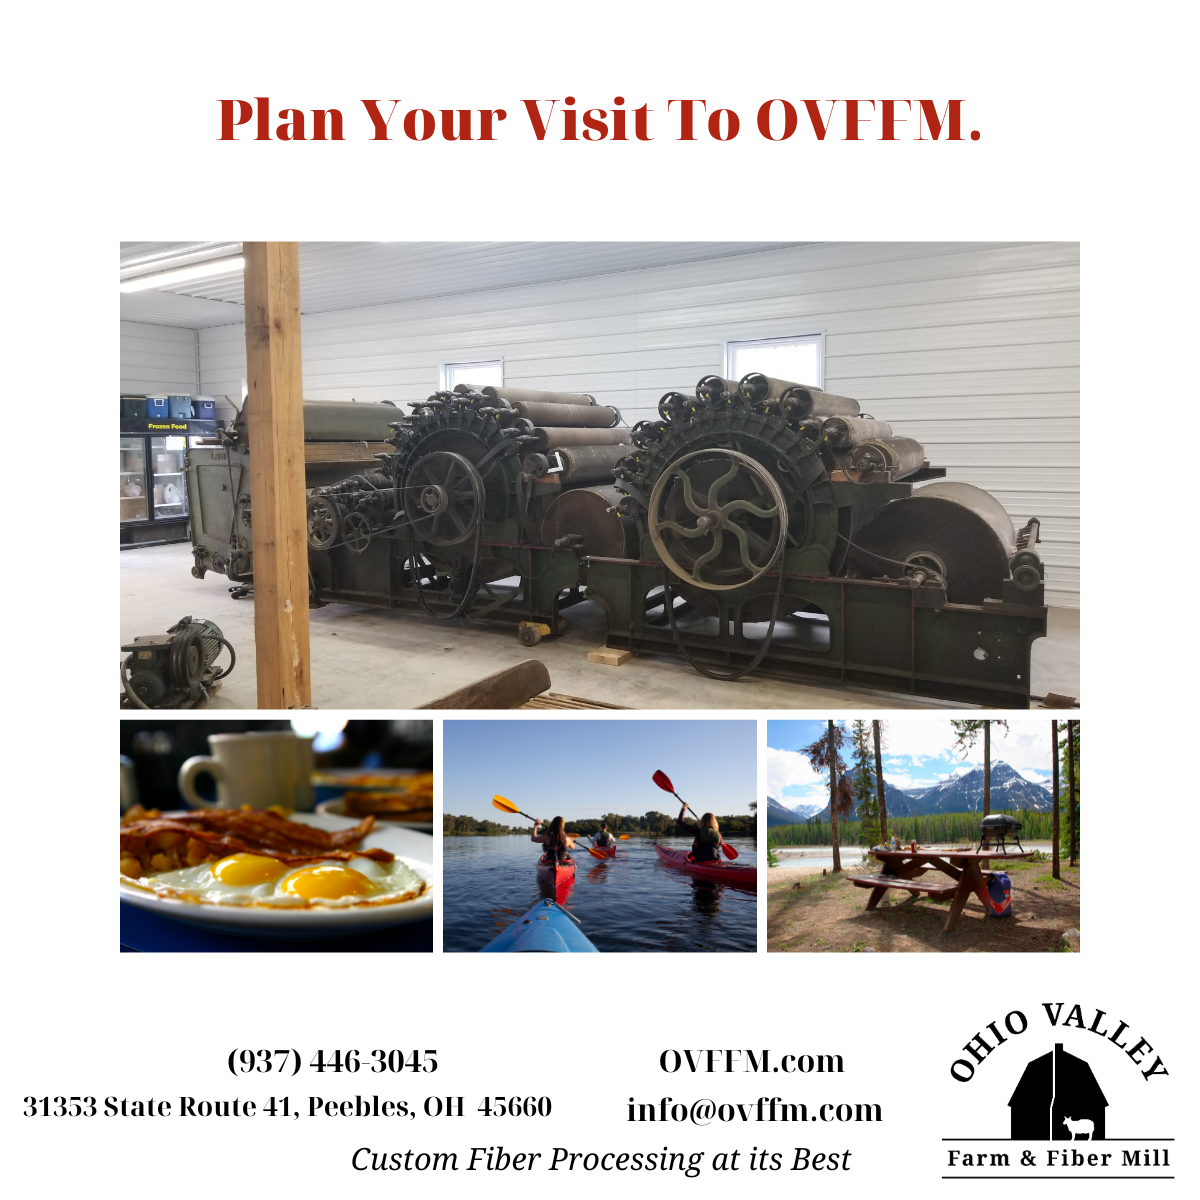 Plan a trip to Ohio Valley Farm and Fiber Mill to drop off your natural fiber for fiber processing with our antique milling equipment located in Adams County,, Ohio